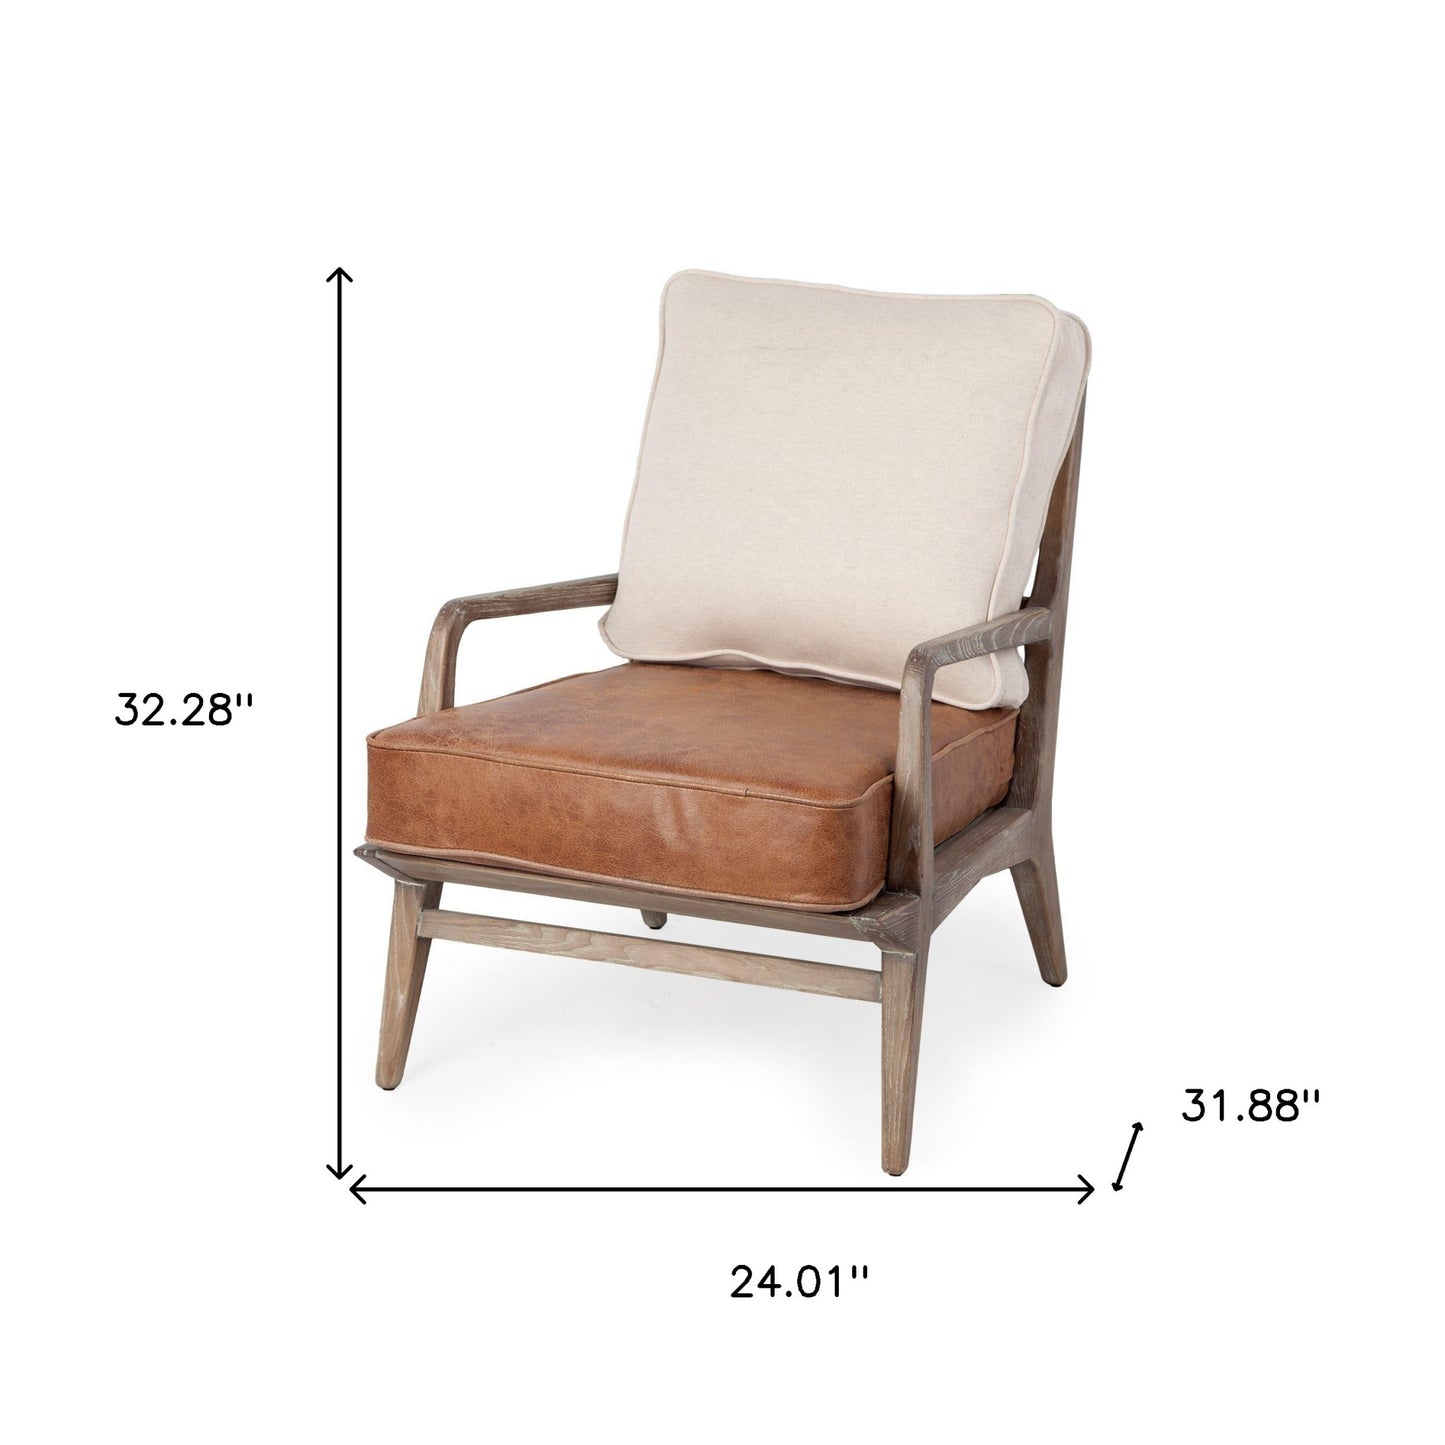 24" Beige and Brown And Brown Leather Arm Chair